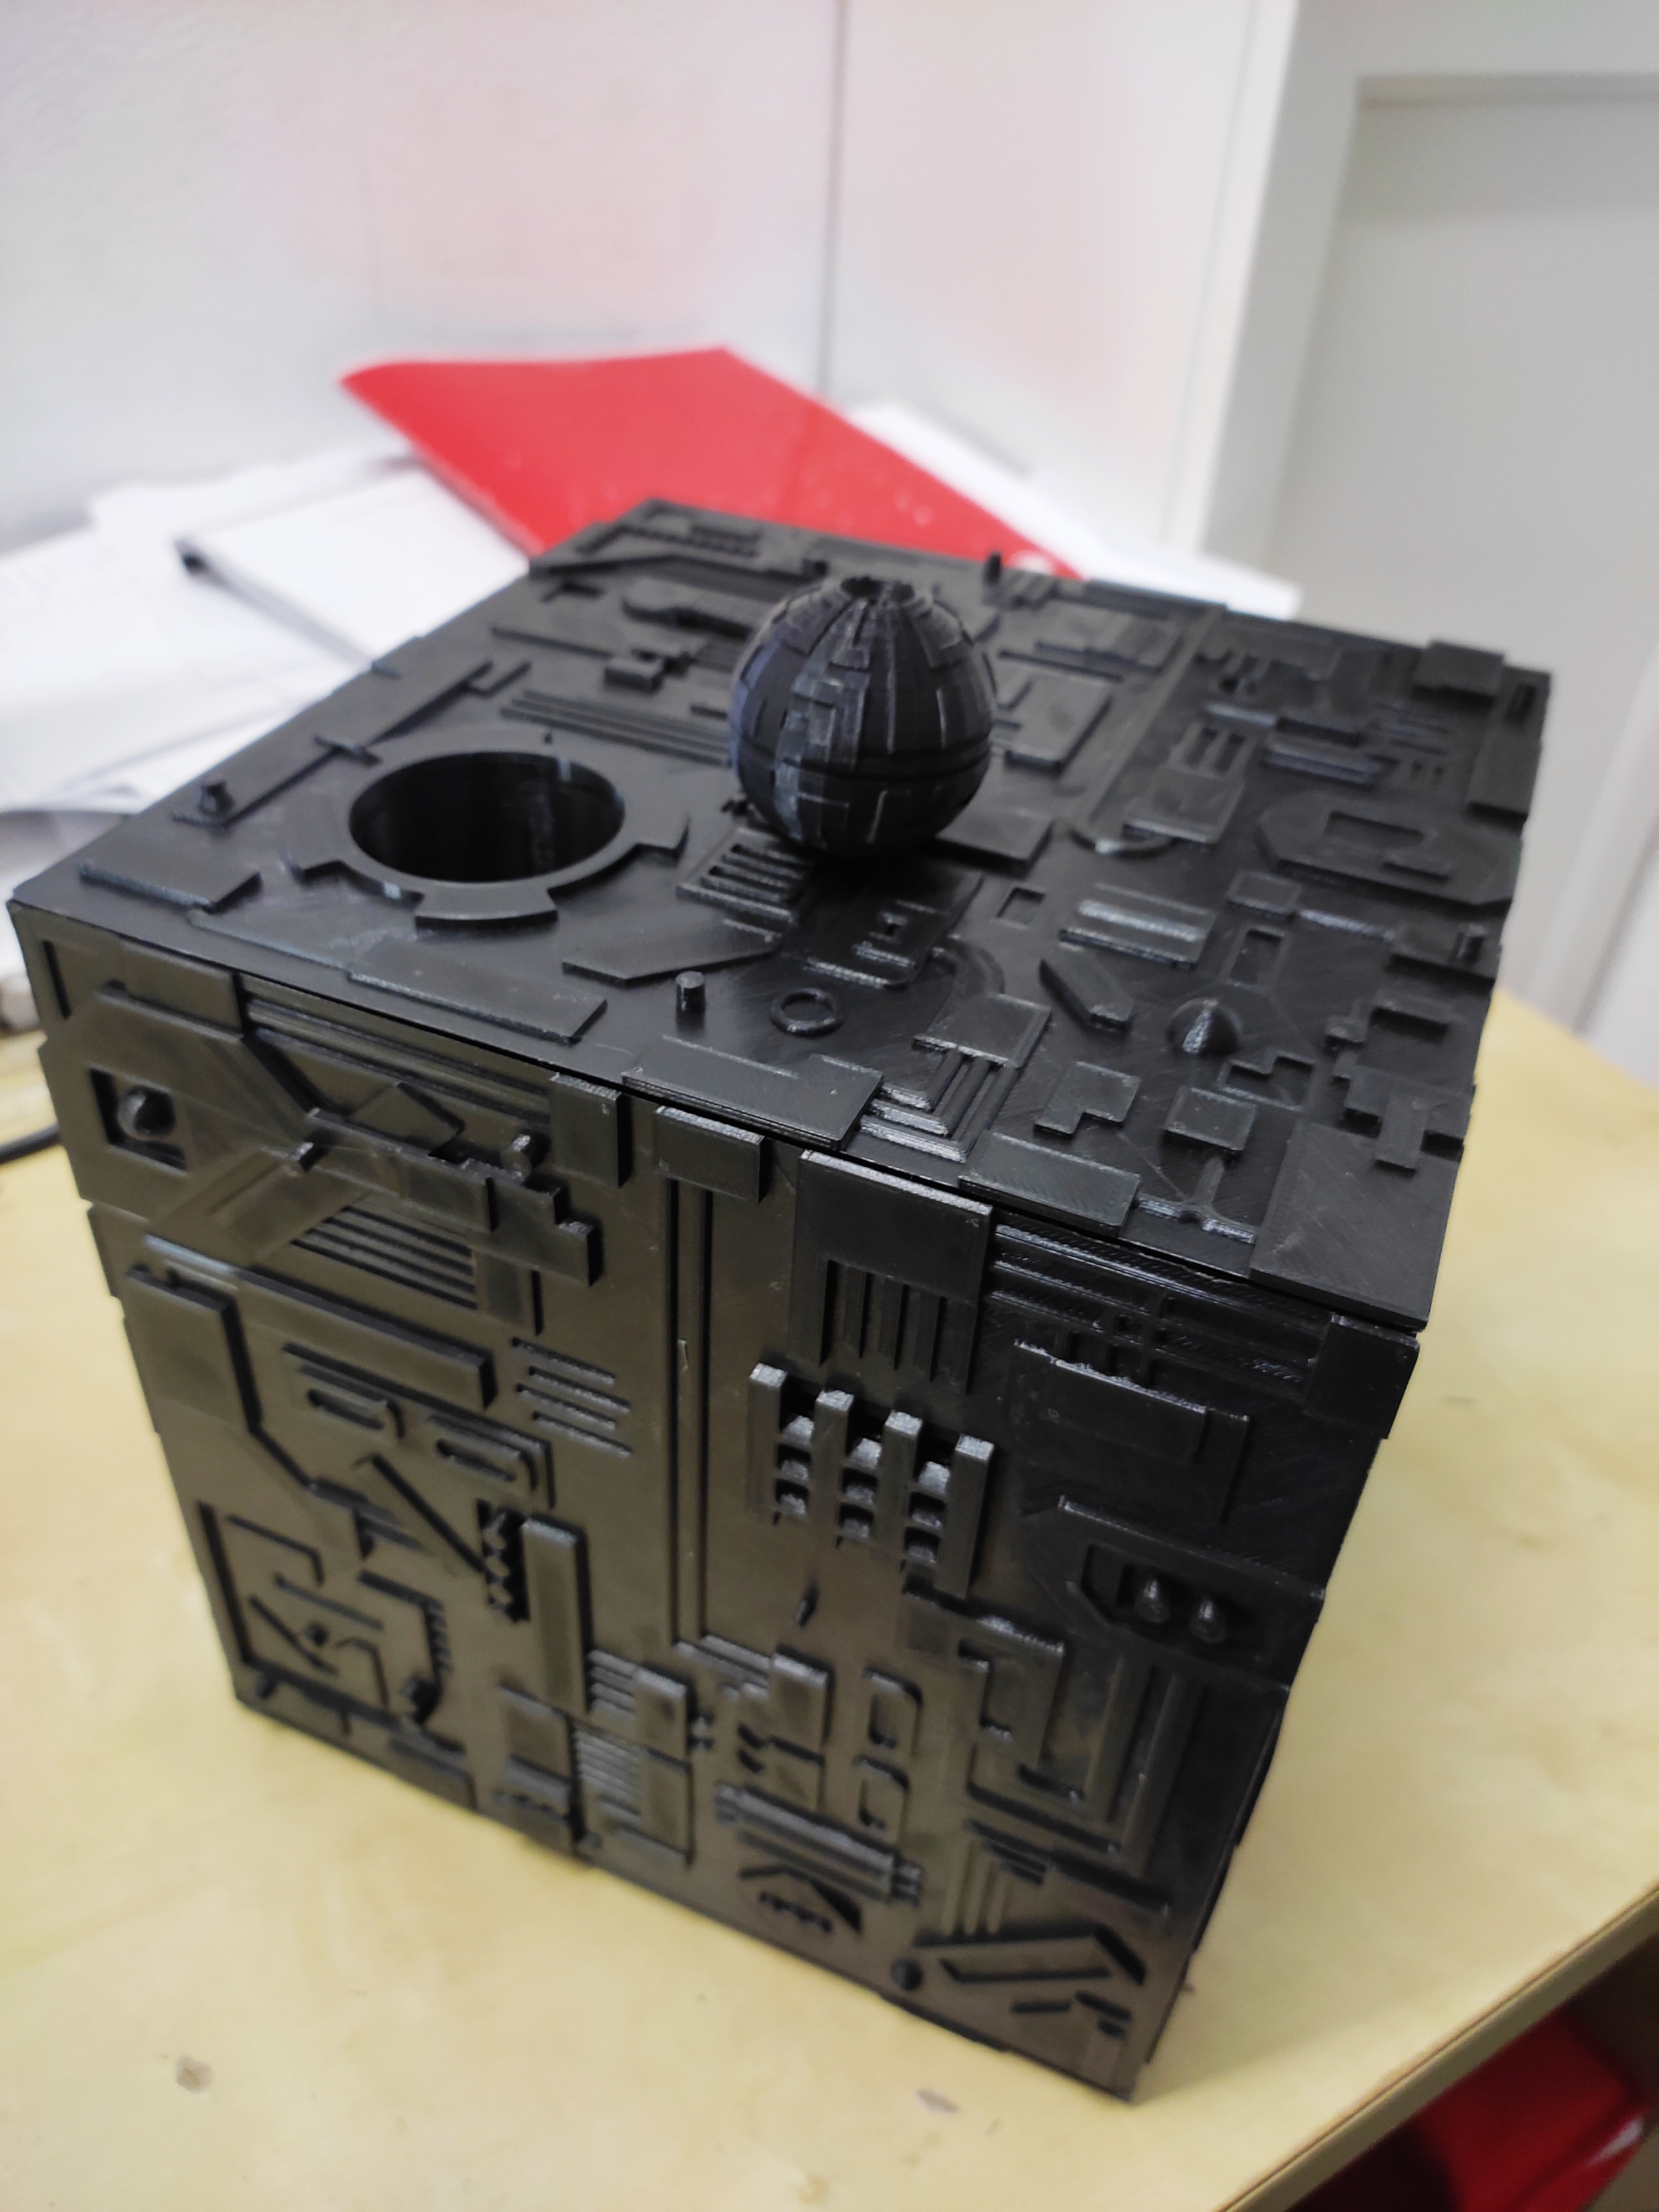 Borg cube with sphere